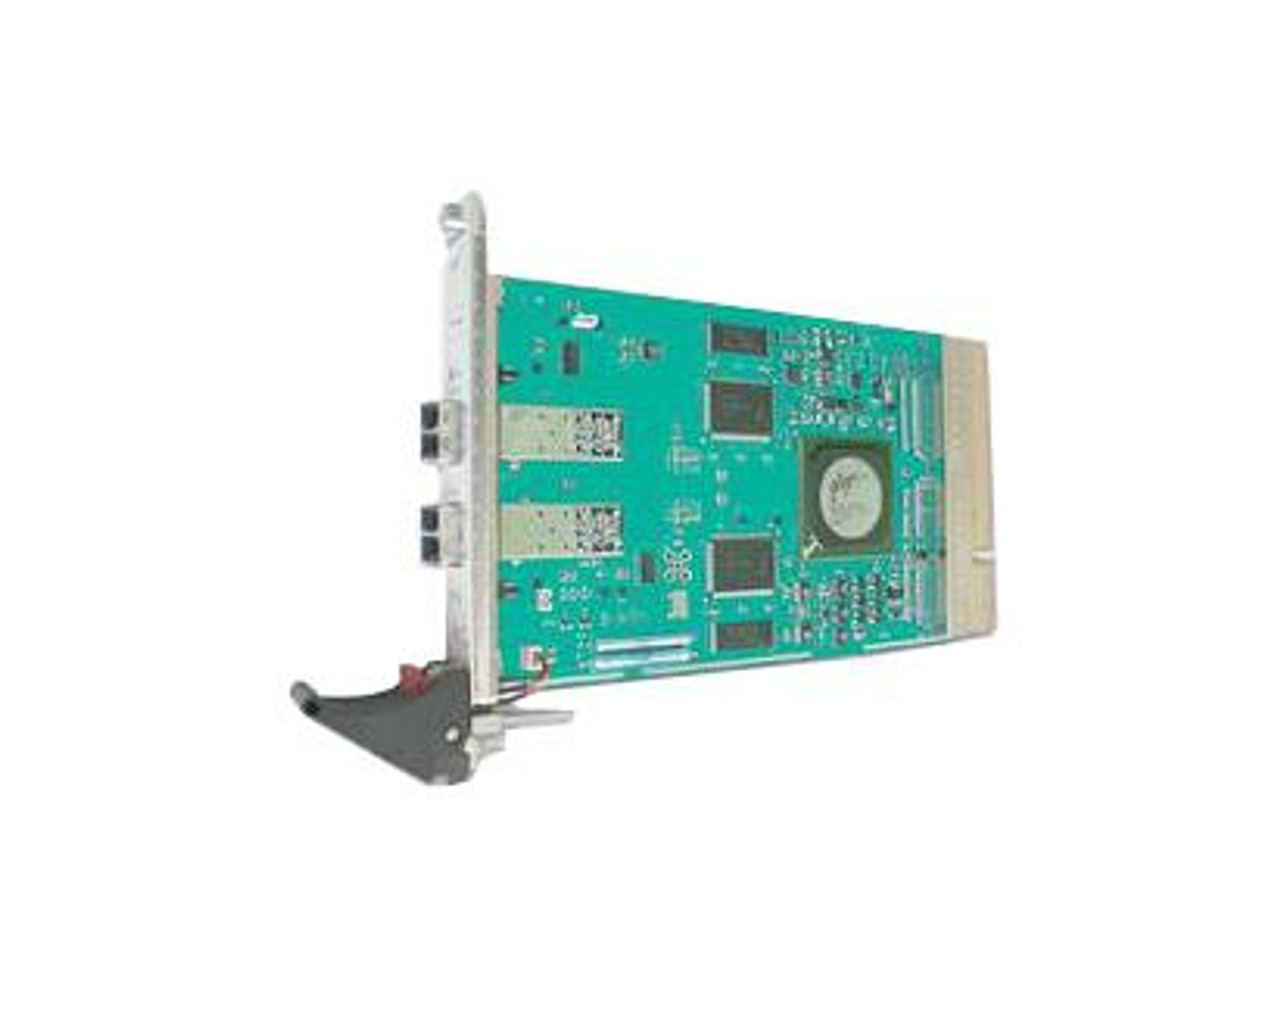 QCP2342 QLogic 2-Gbps Dual Channel 66MHz cPCI Fibre Channel Host Bus Adapter (HBA)